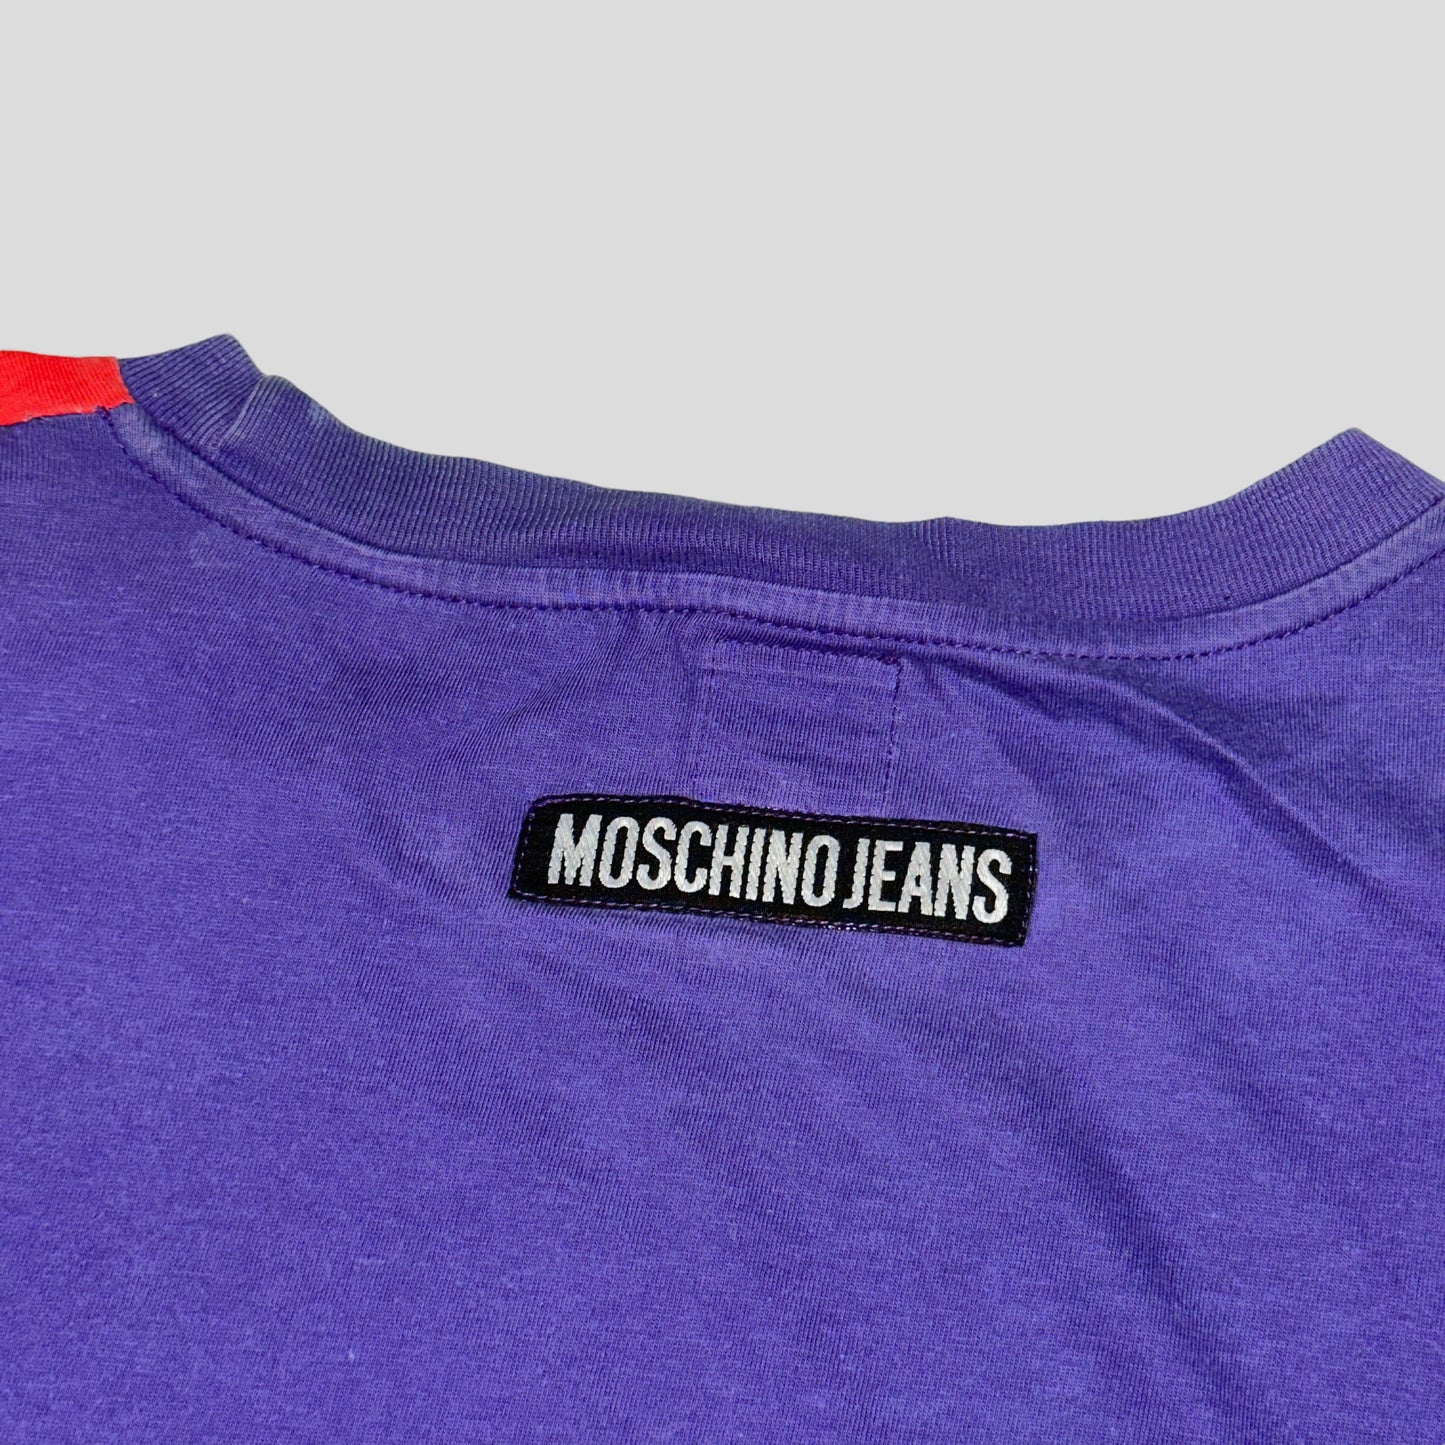 Moschino Jeans 80’s Abstract T-shirt - XL